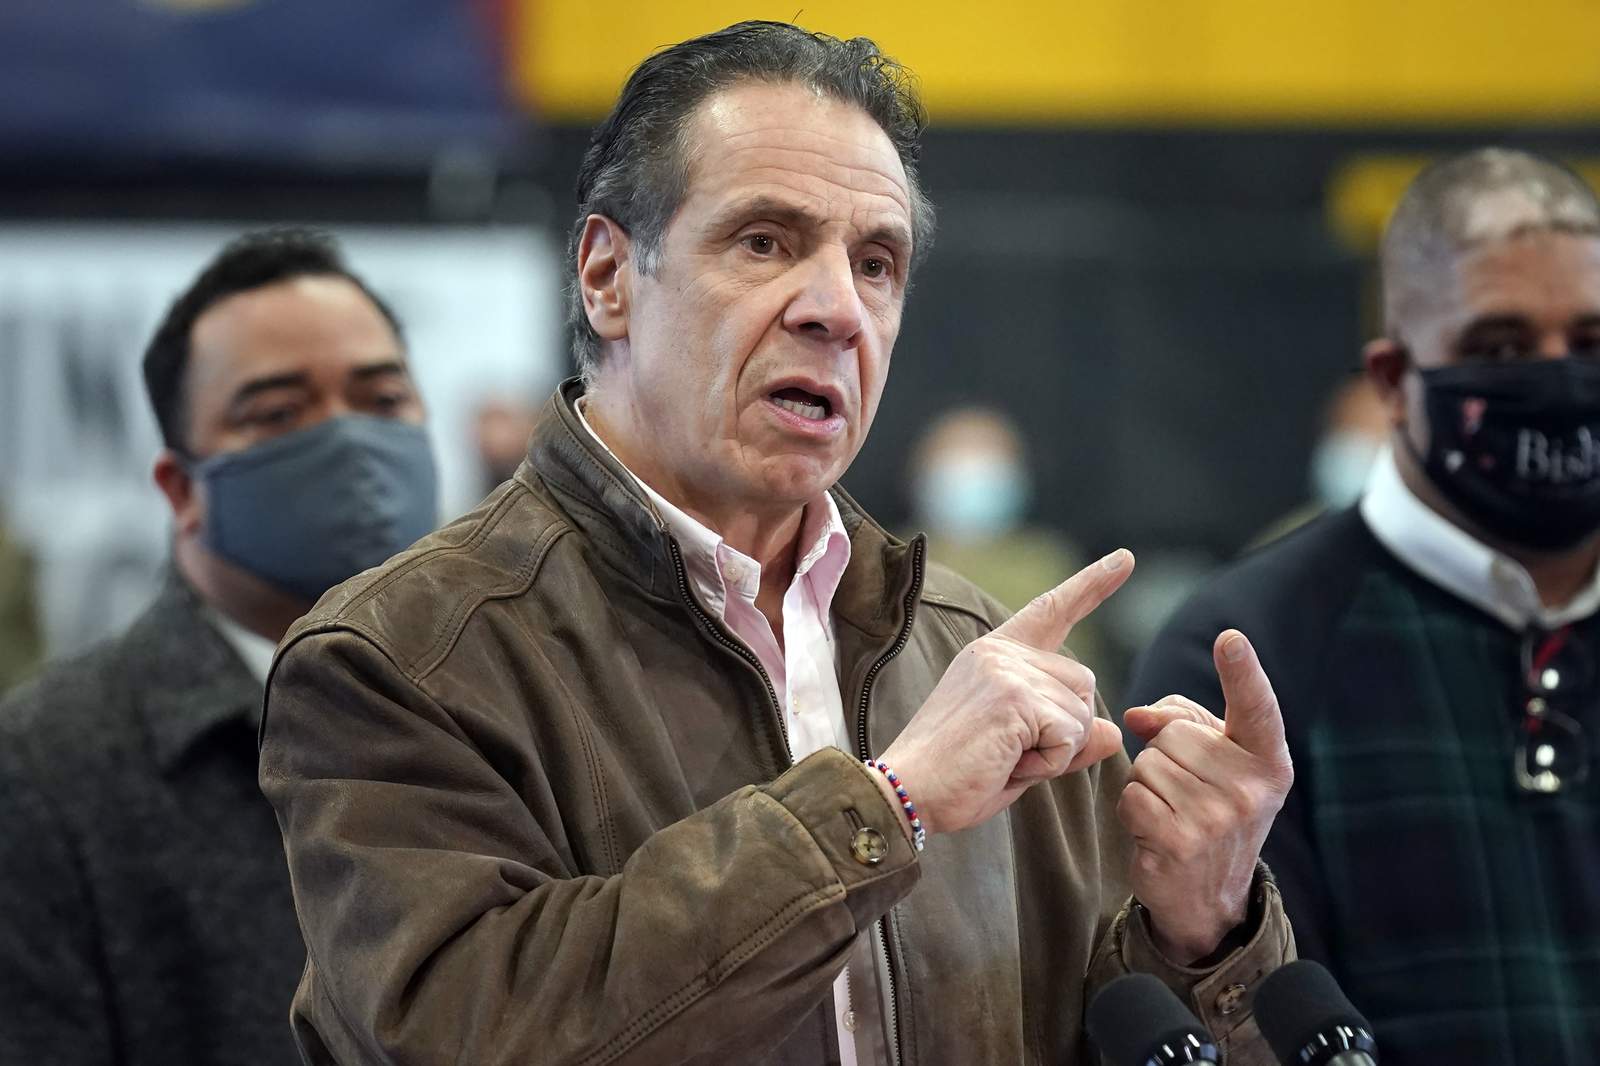 Cuomo defiant as top New York lawmakers call on him to quit